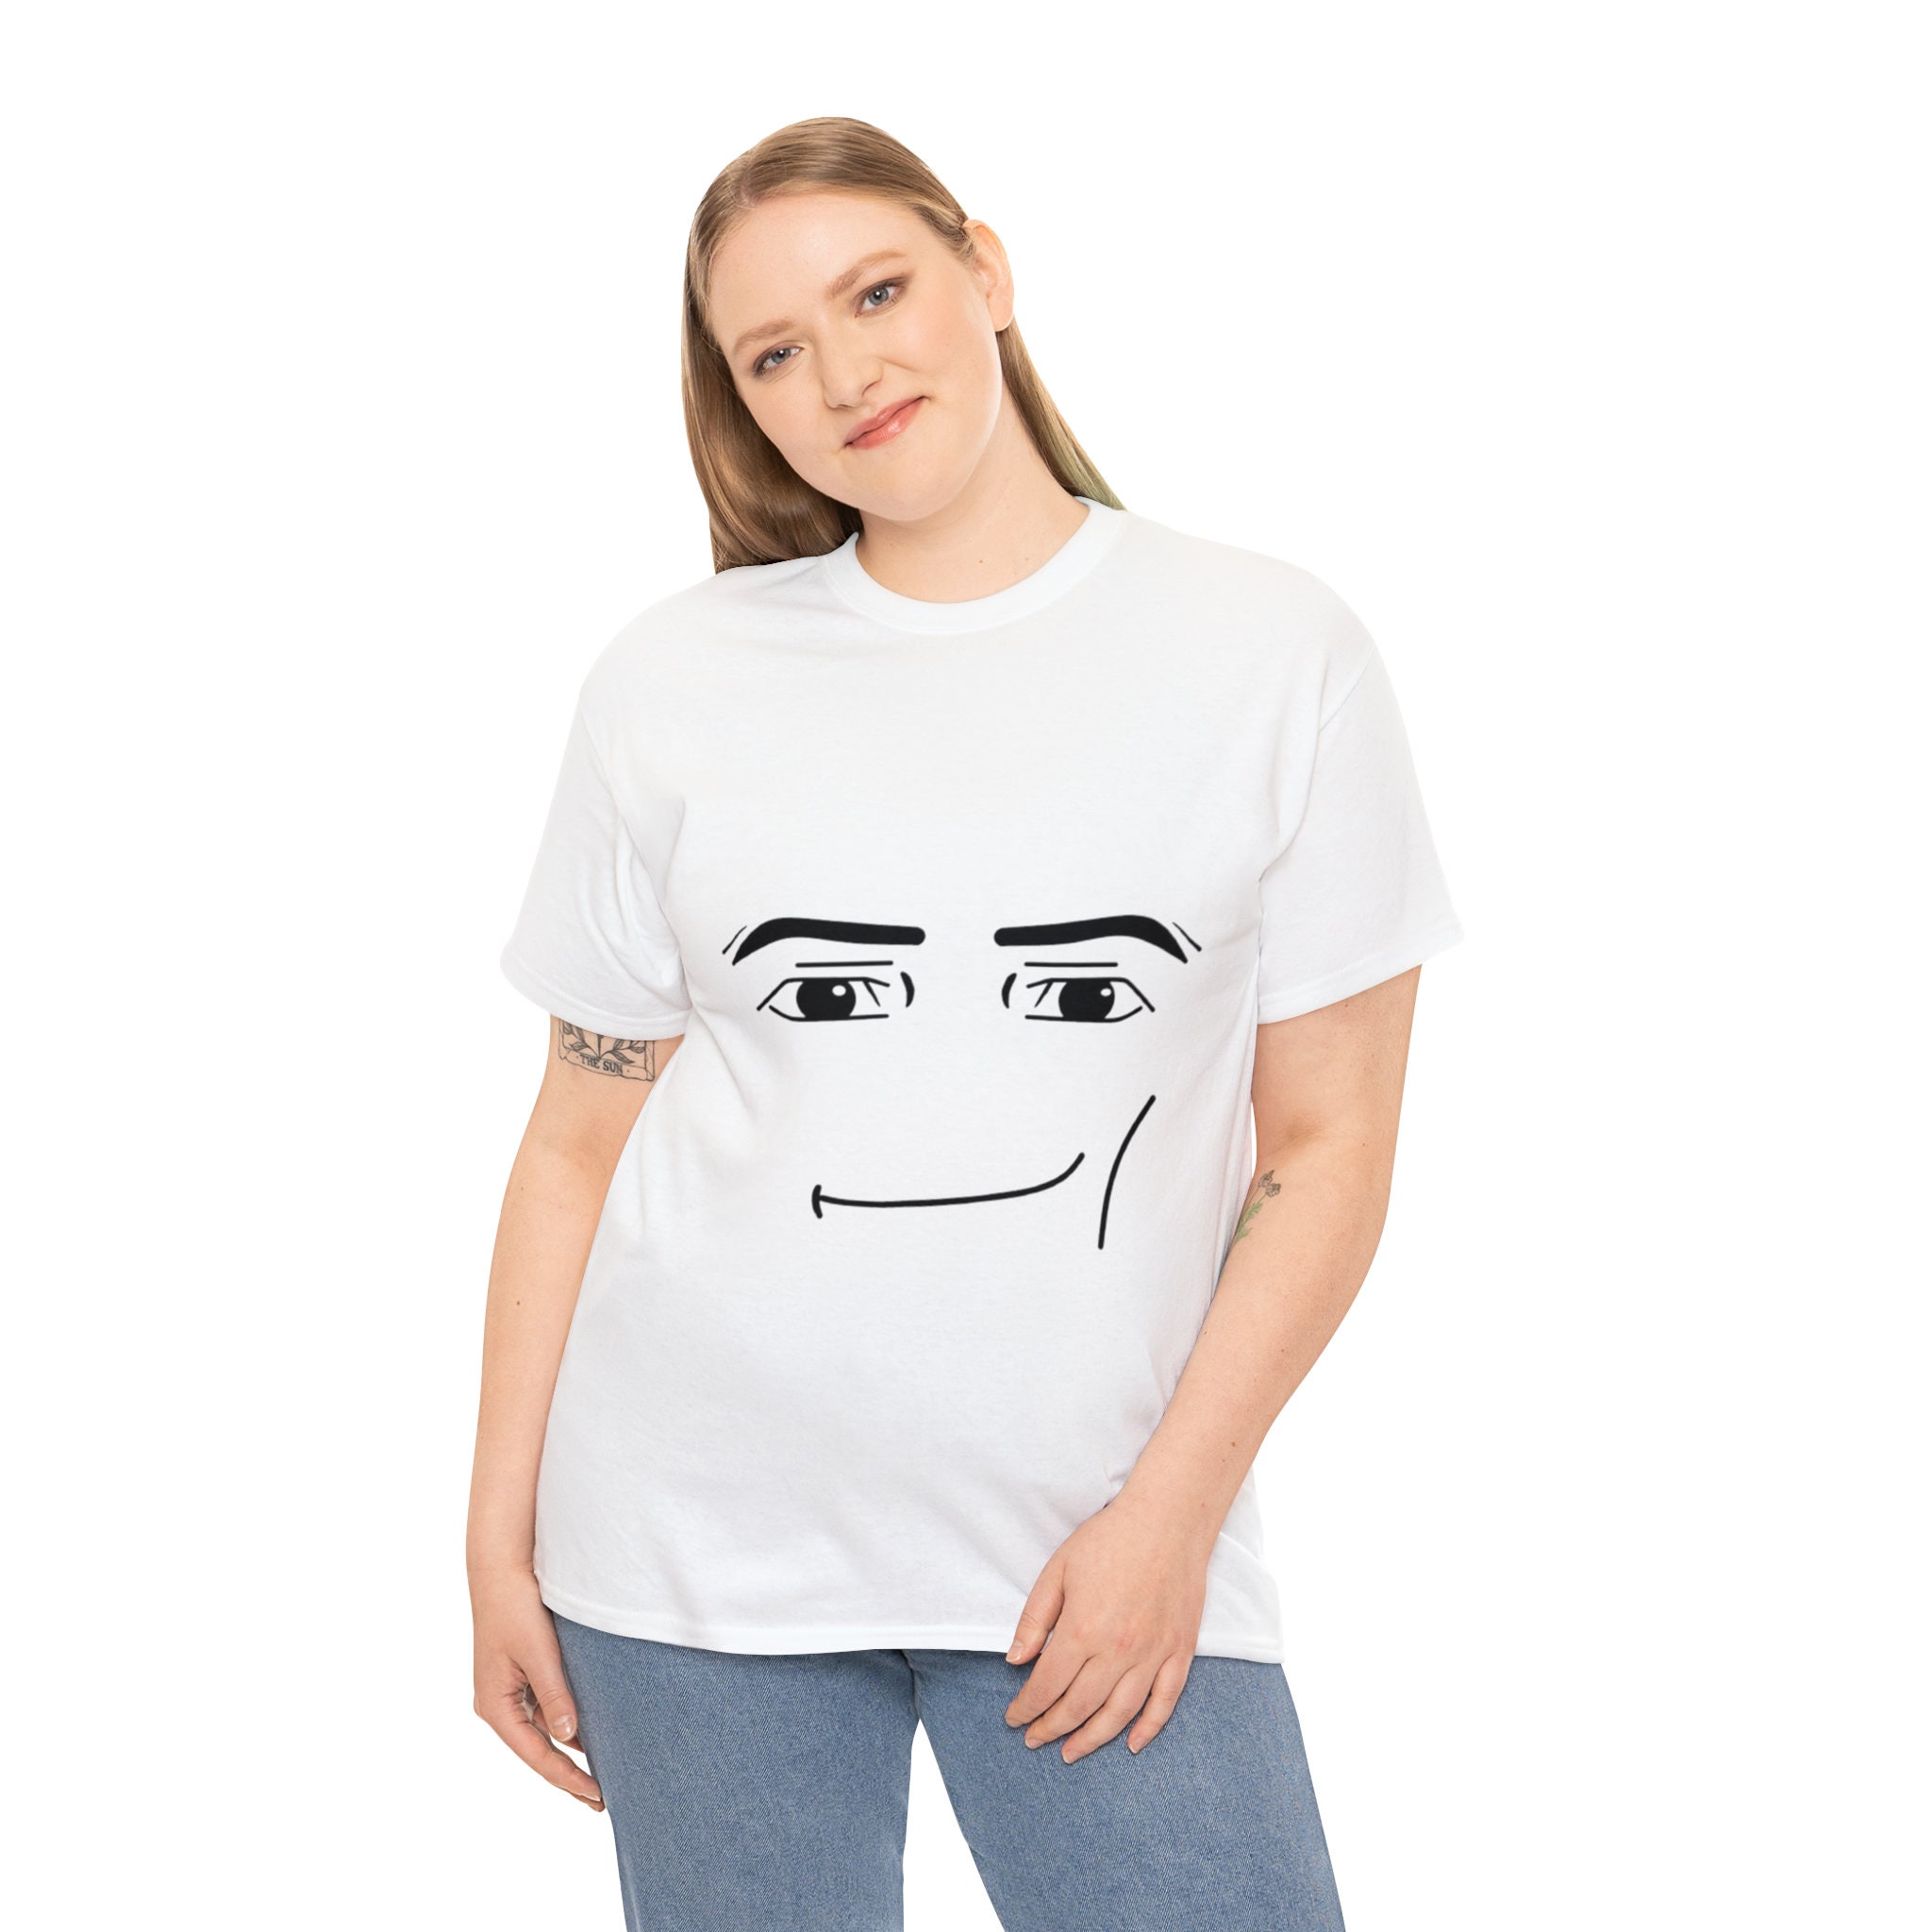 roblox man face Essential T-Shirt for Sale by DOPANDA .